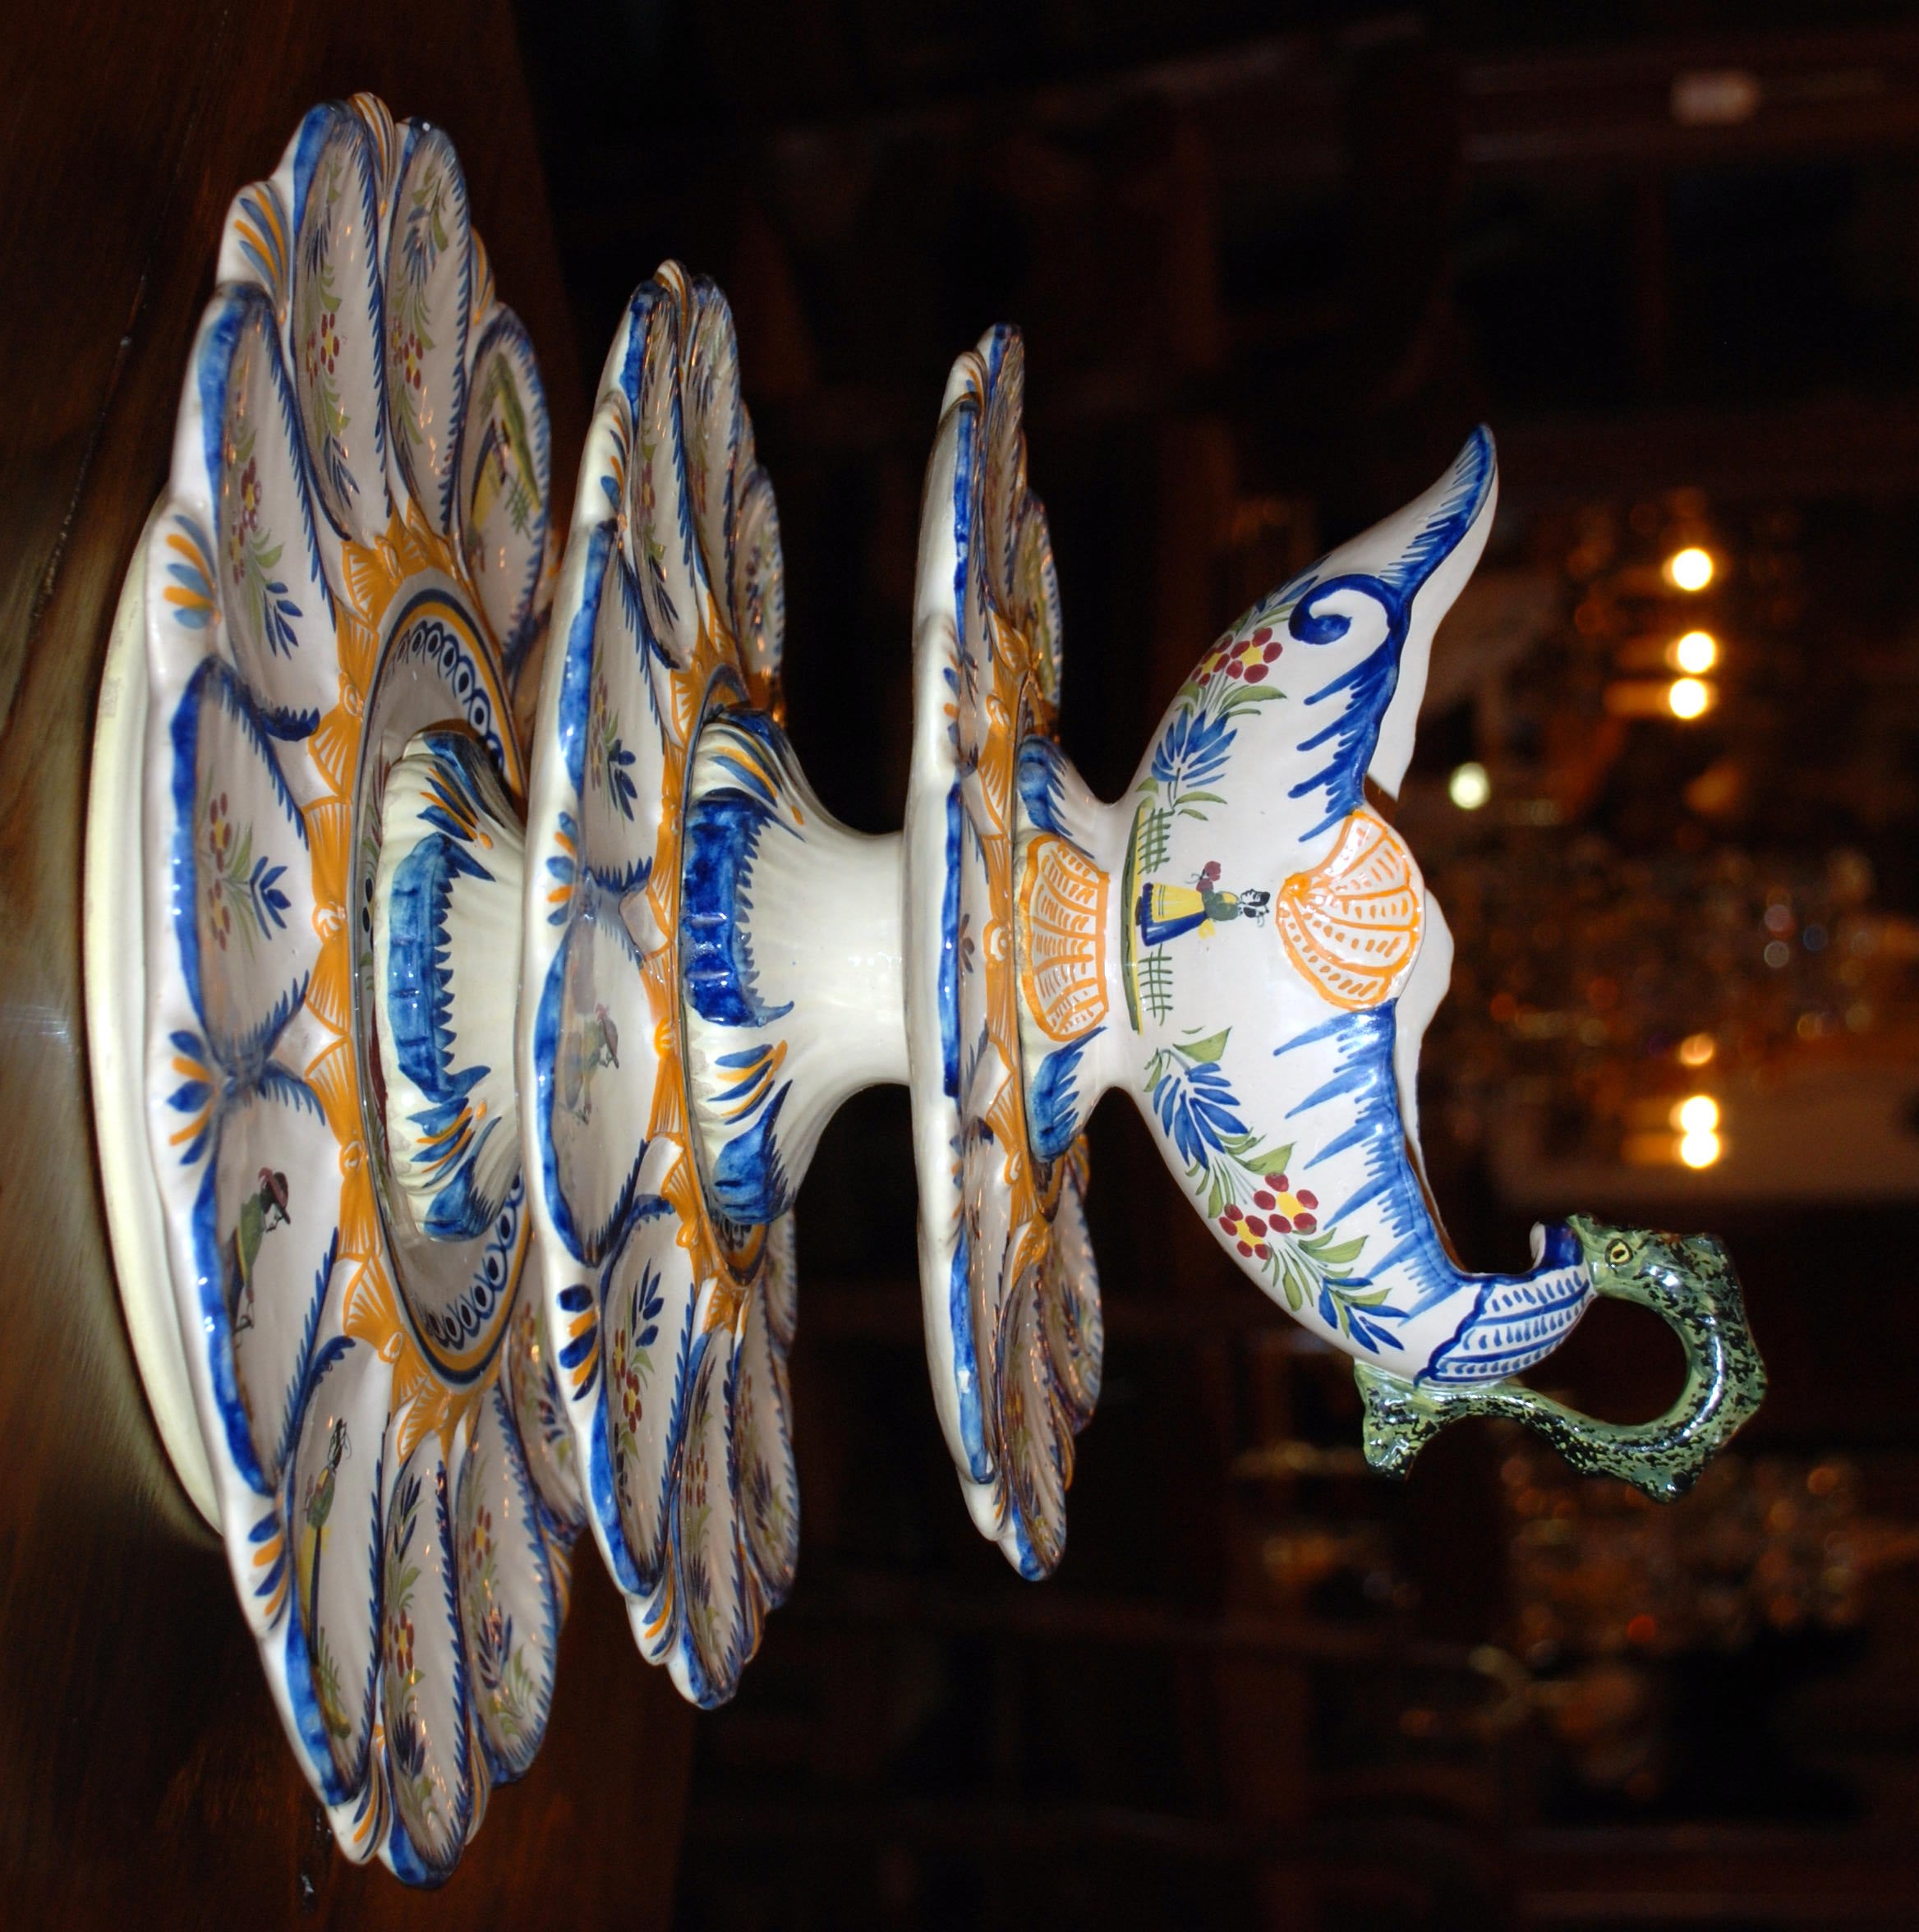 Quimper, Three Tier Oyster Server with Sauce Boat